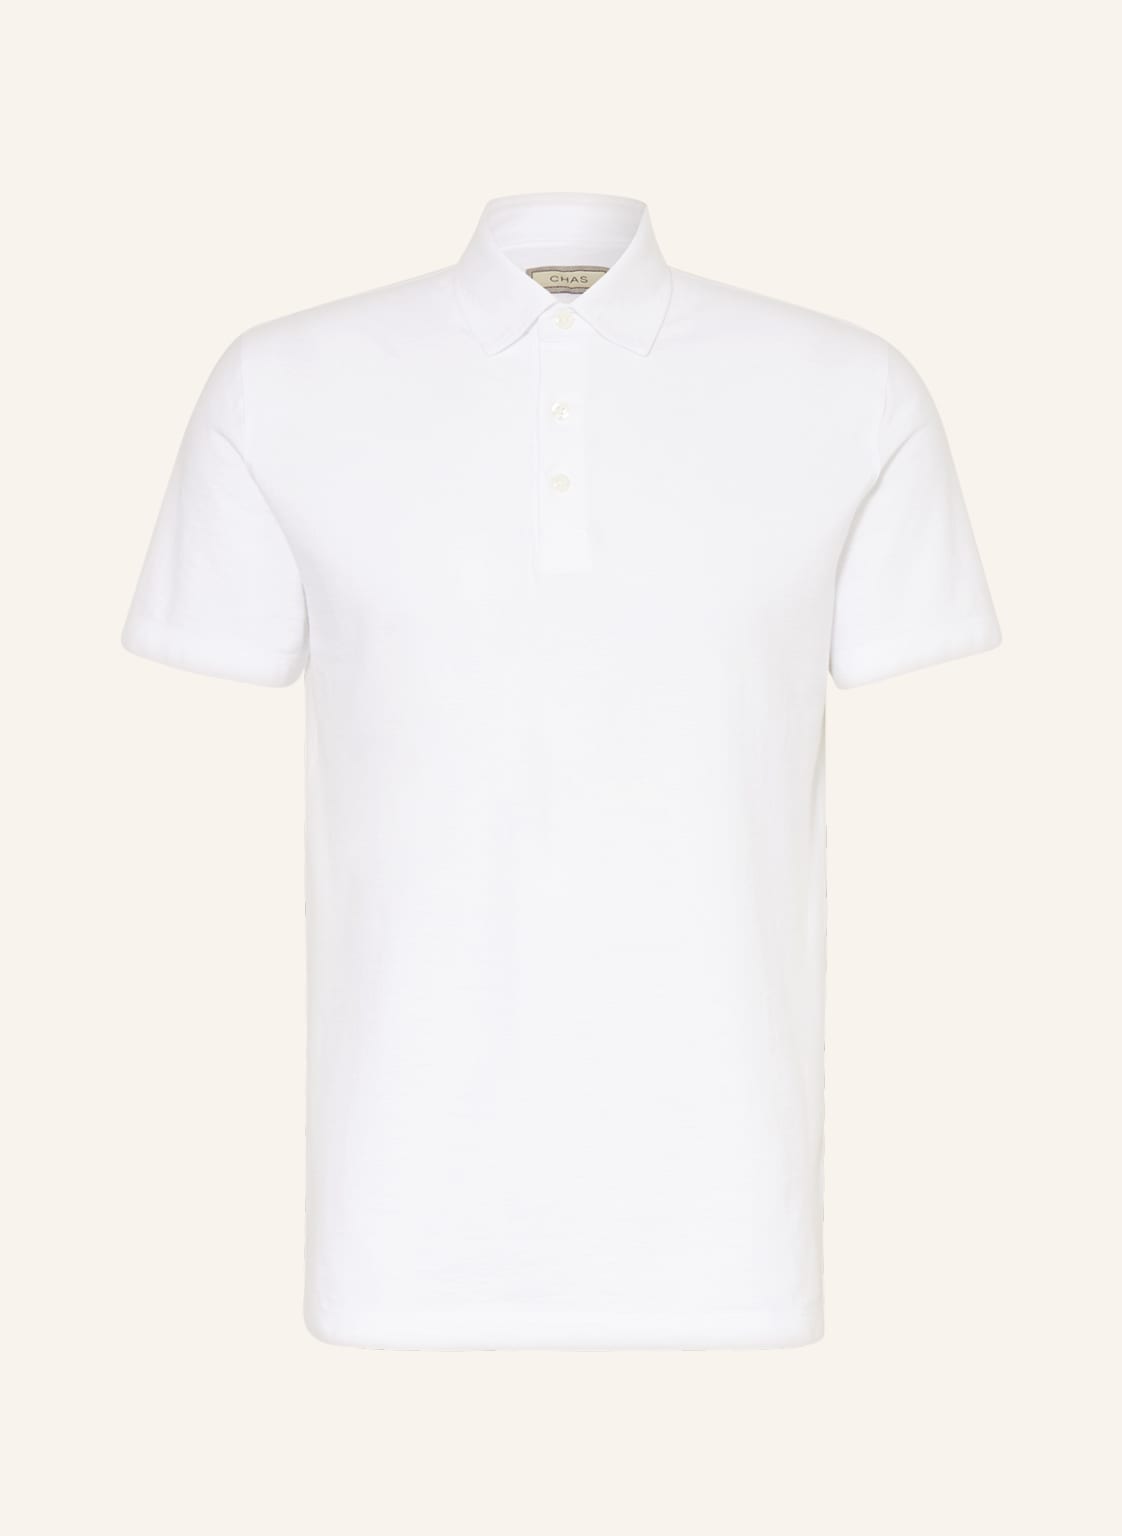 Image of Chas Jersey-Poloshirt weiss